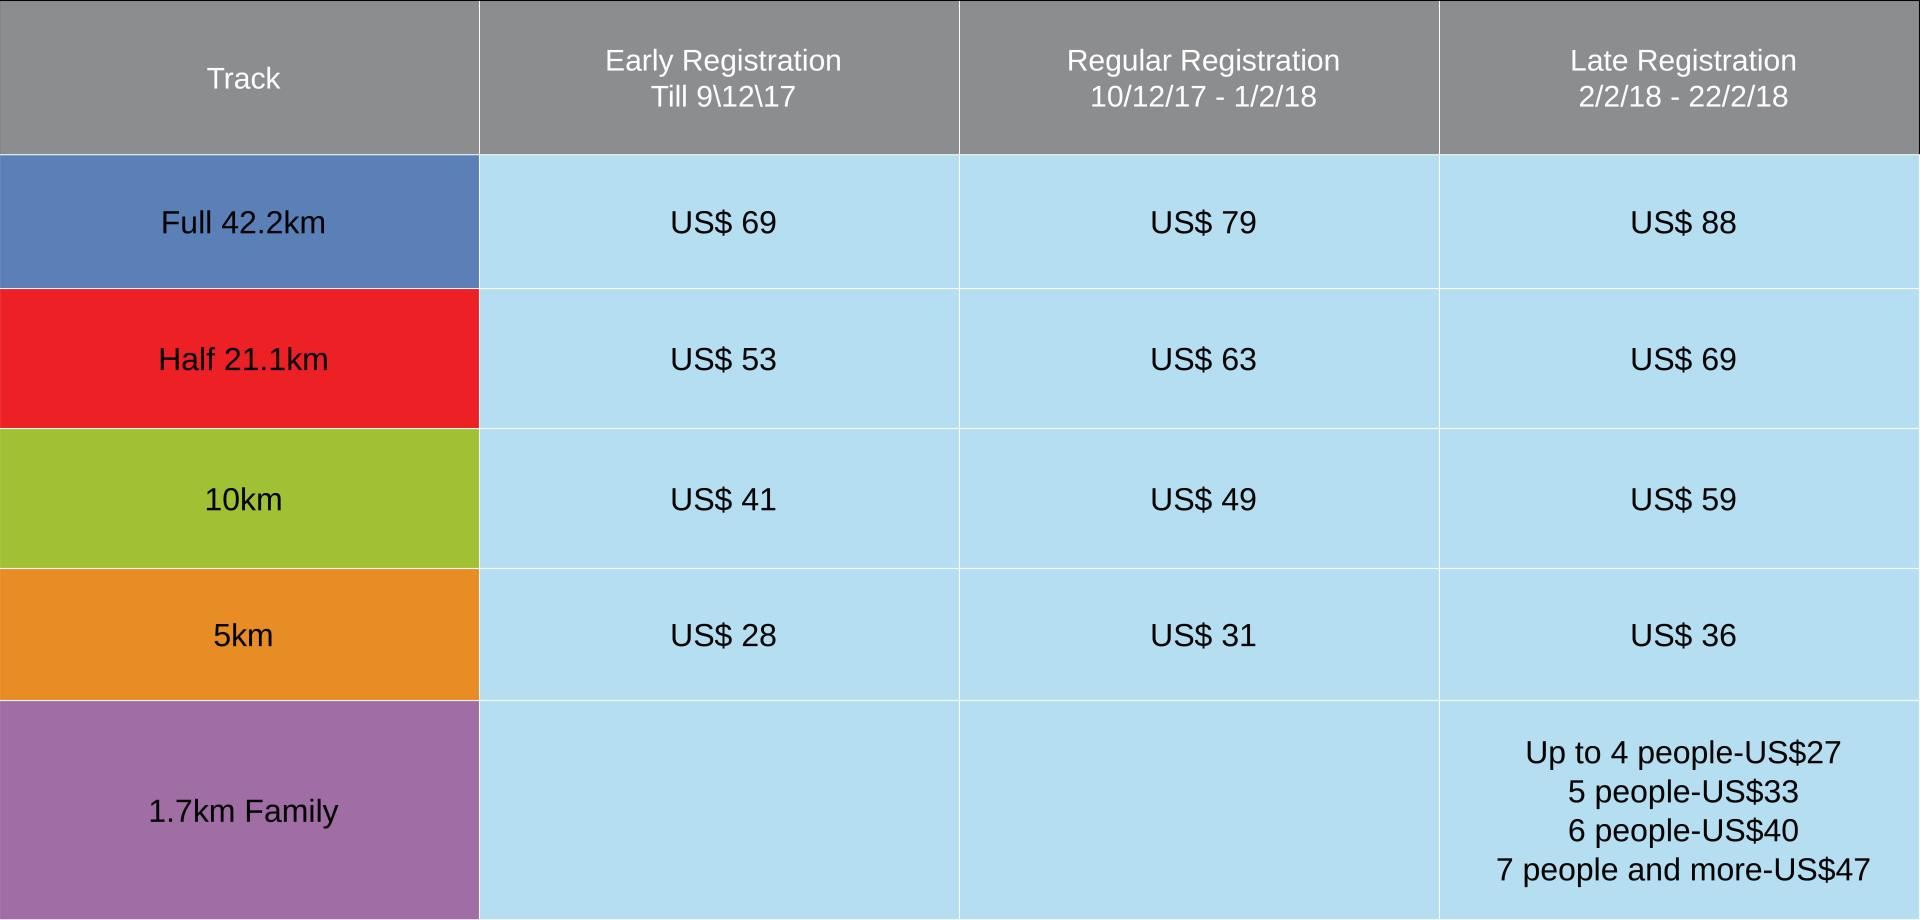 Prices and Registration Dates